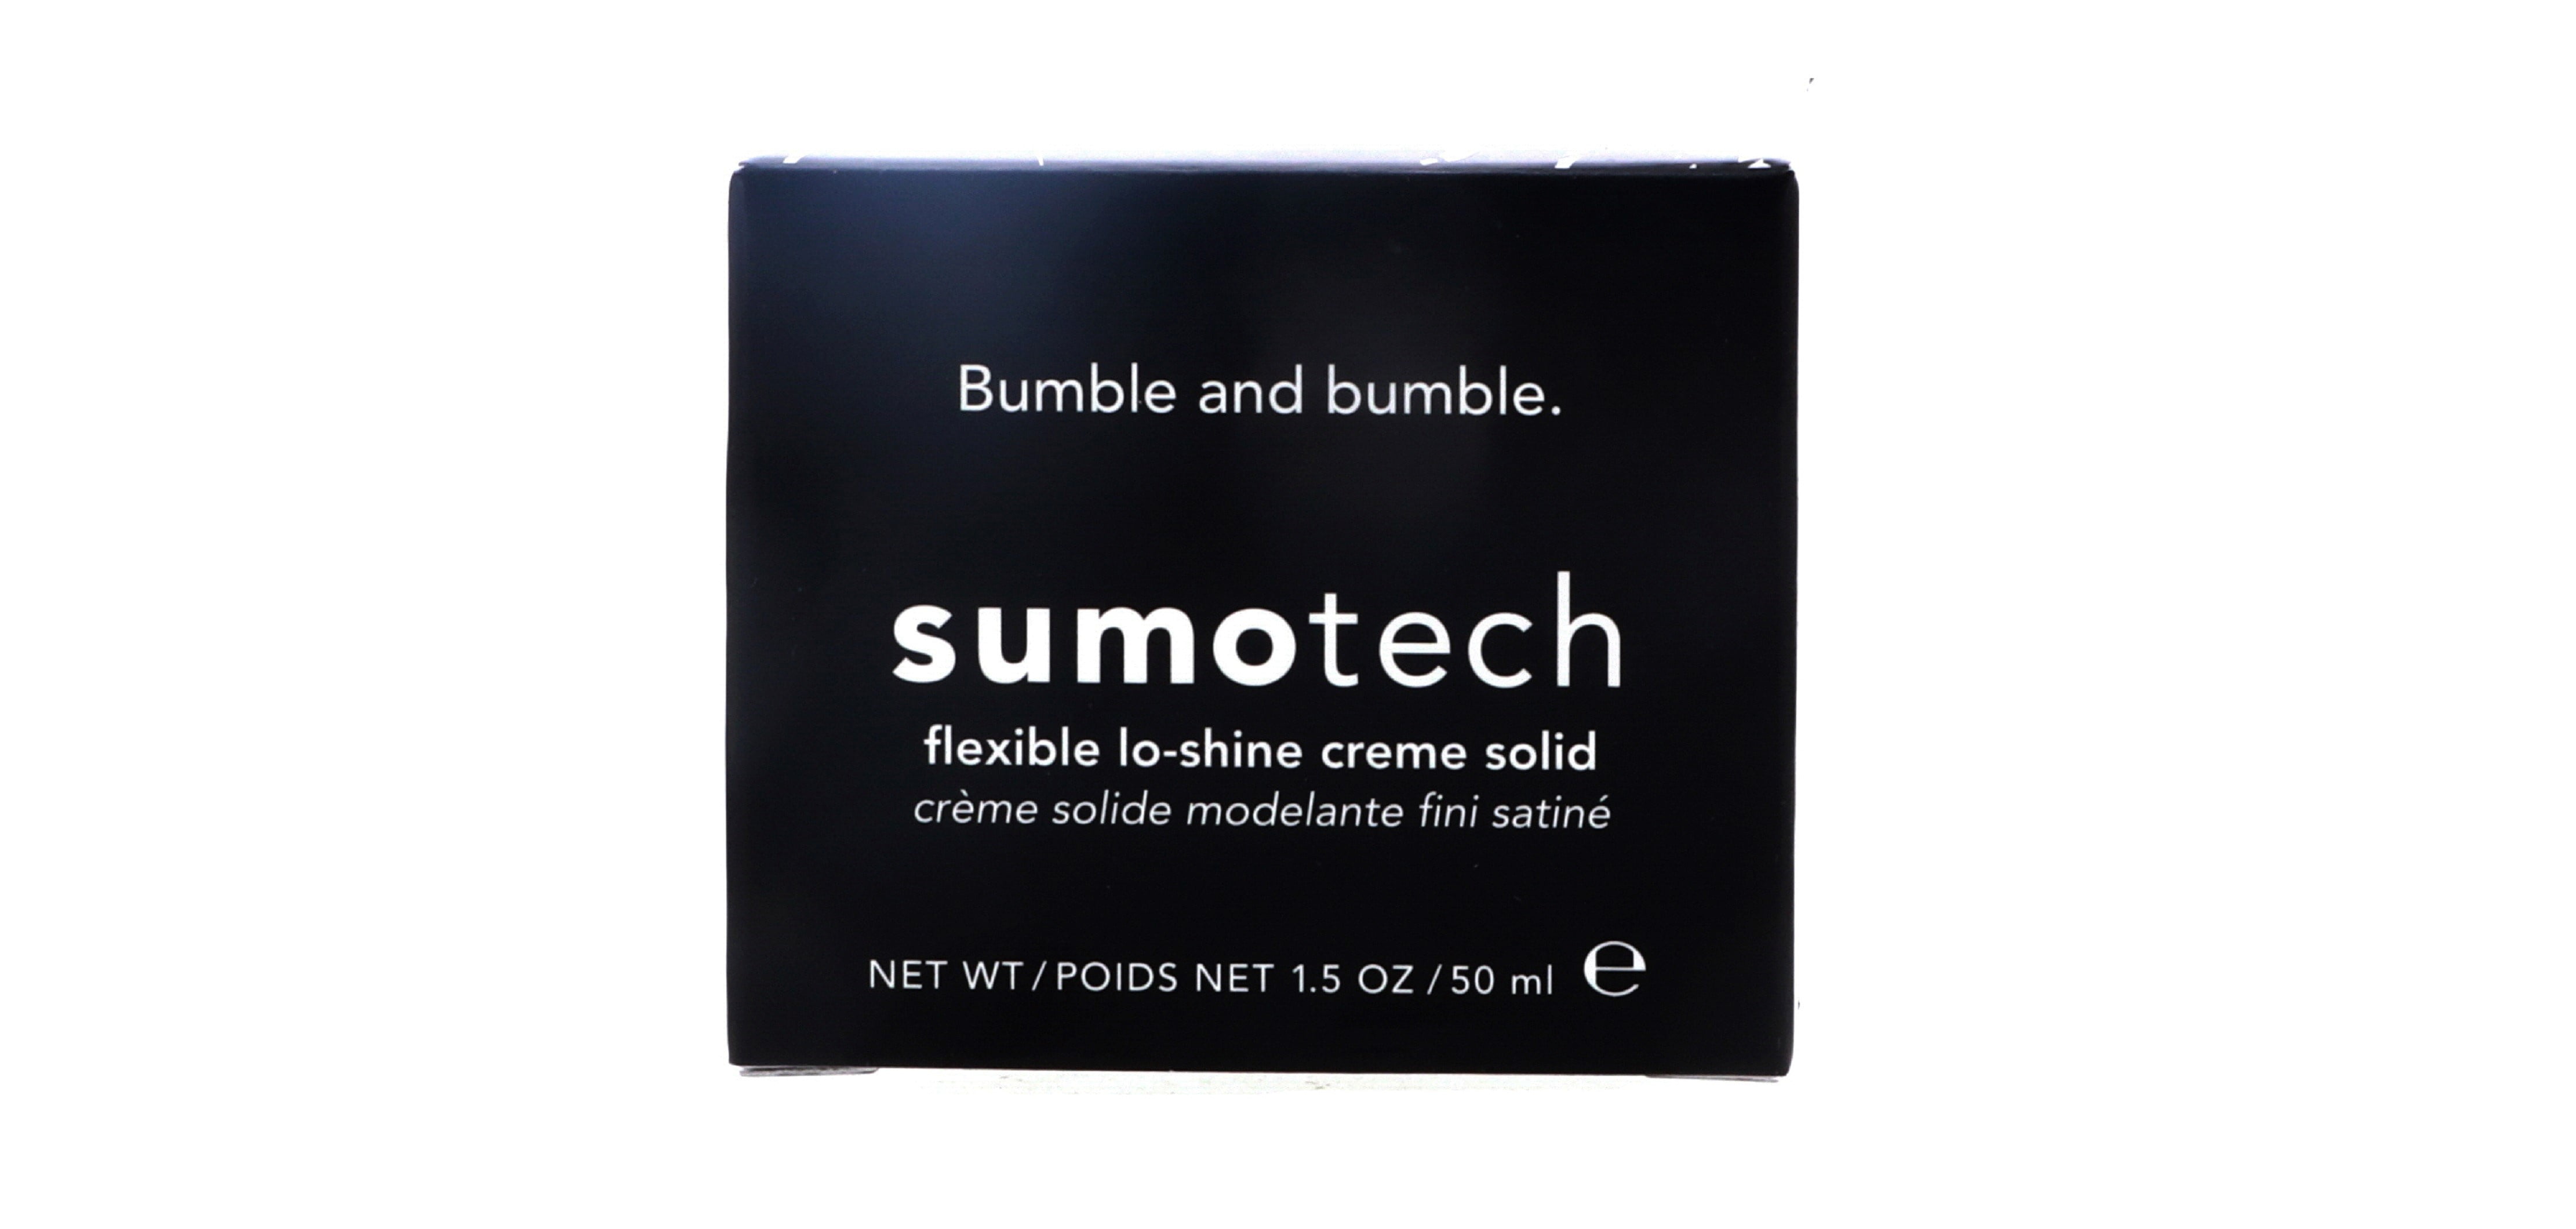 Bumble and Bumble Sumo Tech Creme, 1.5 oz 2 Pack - image 1 of 4